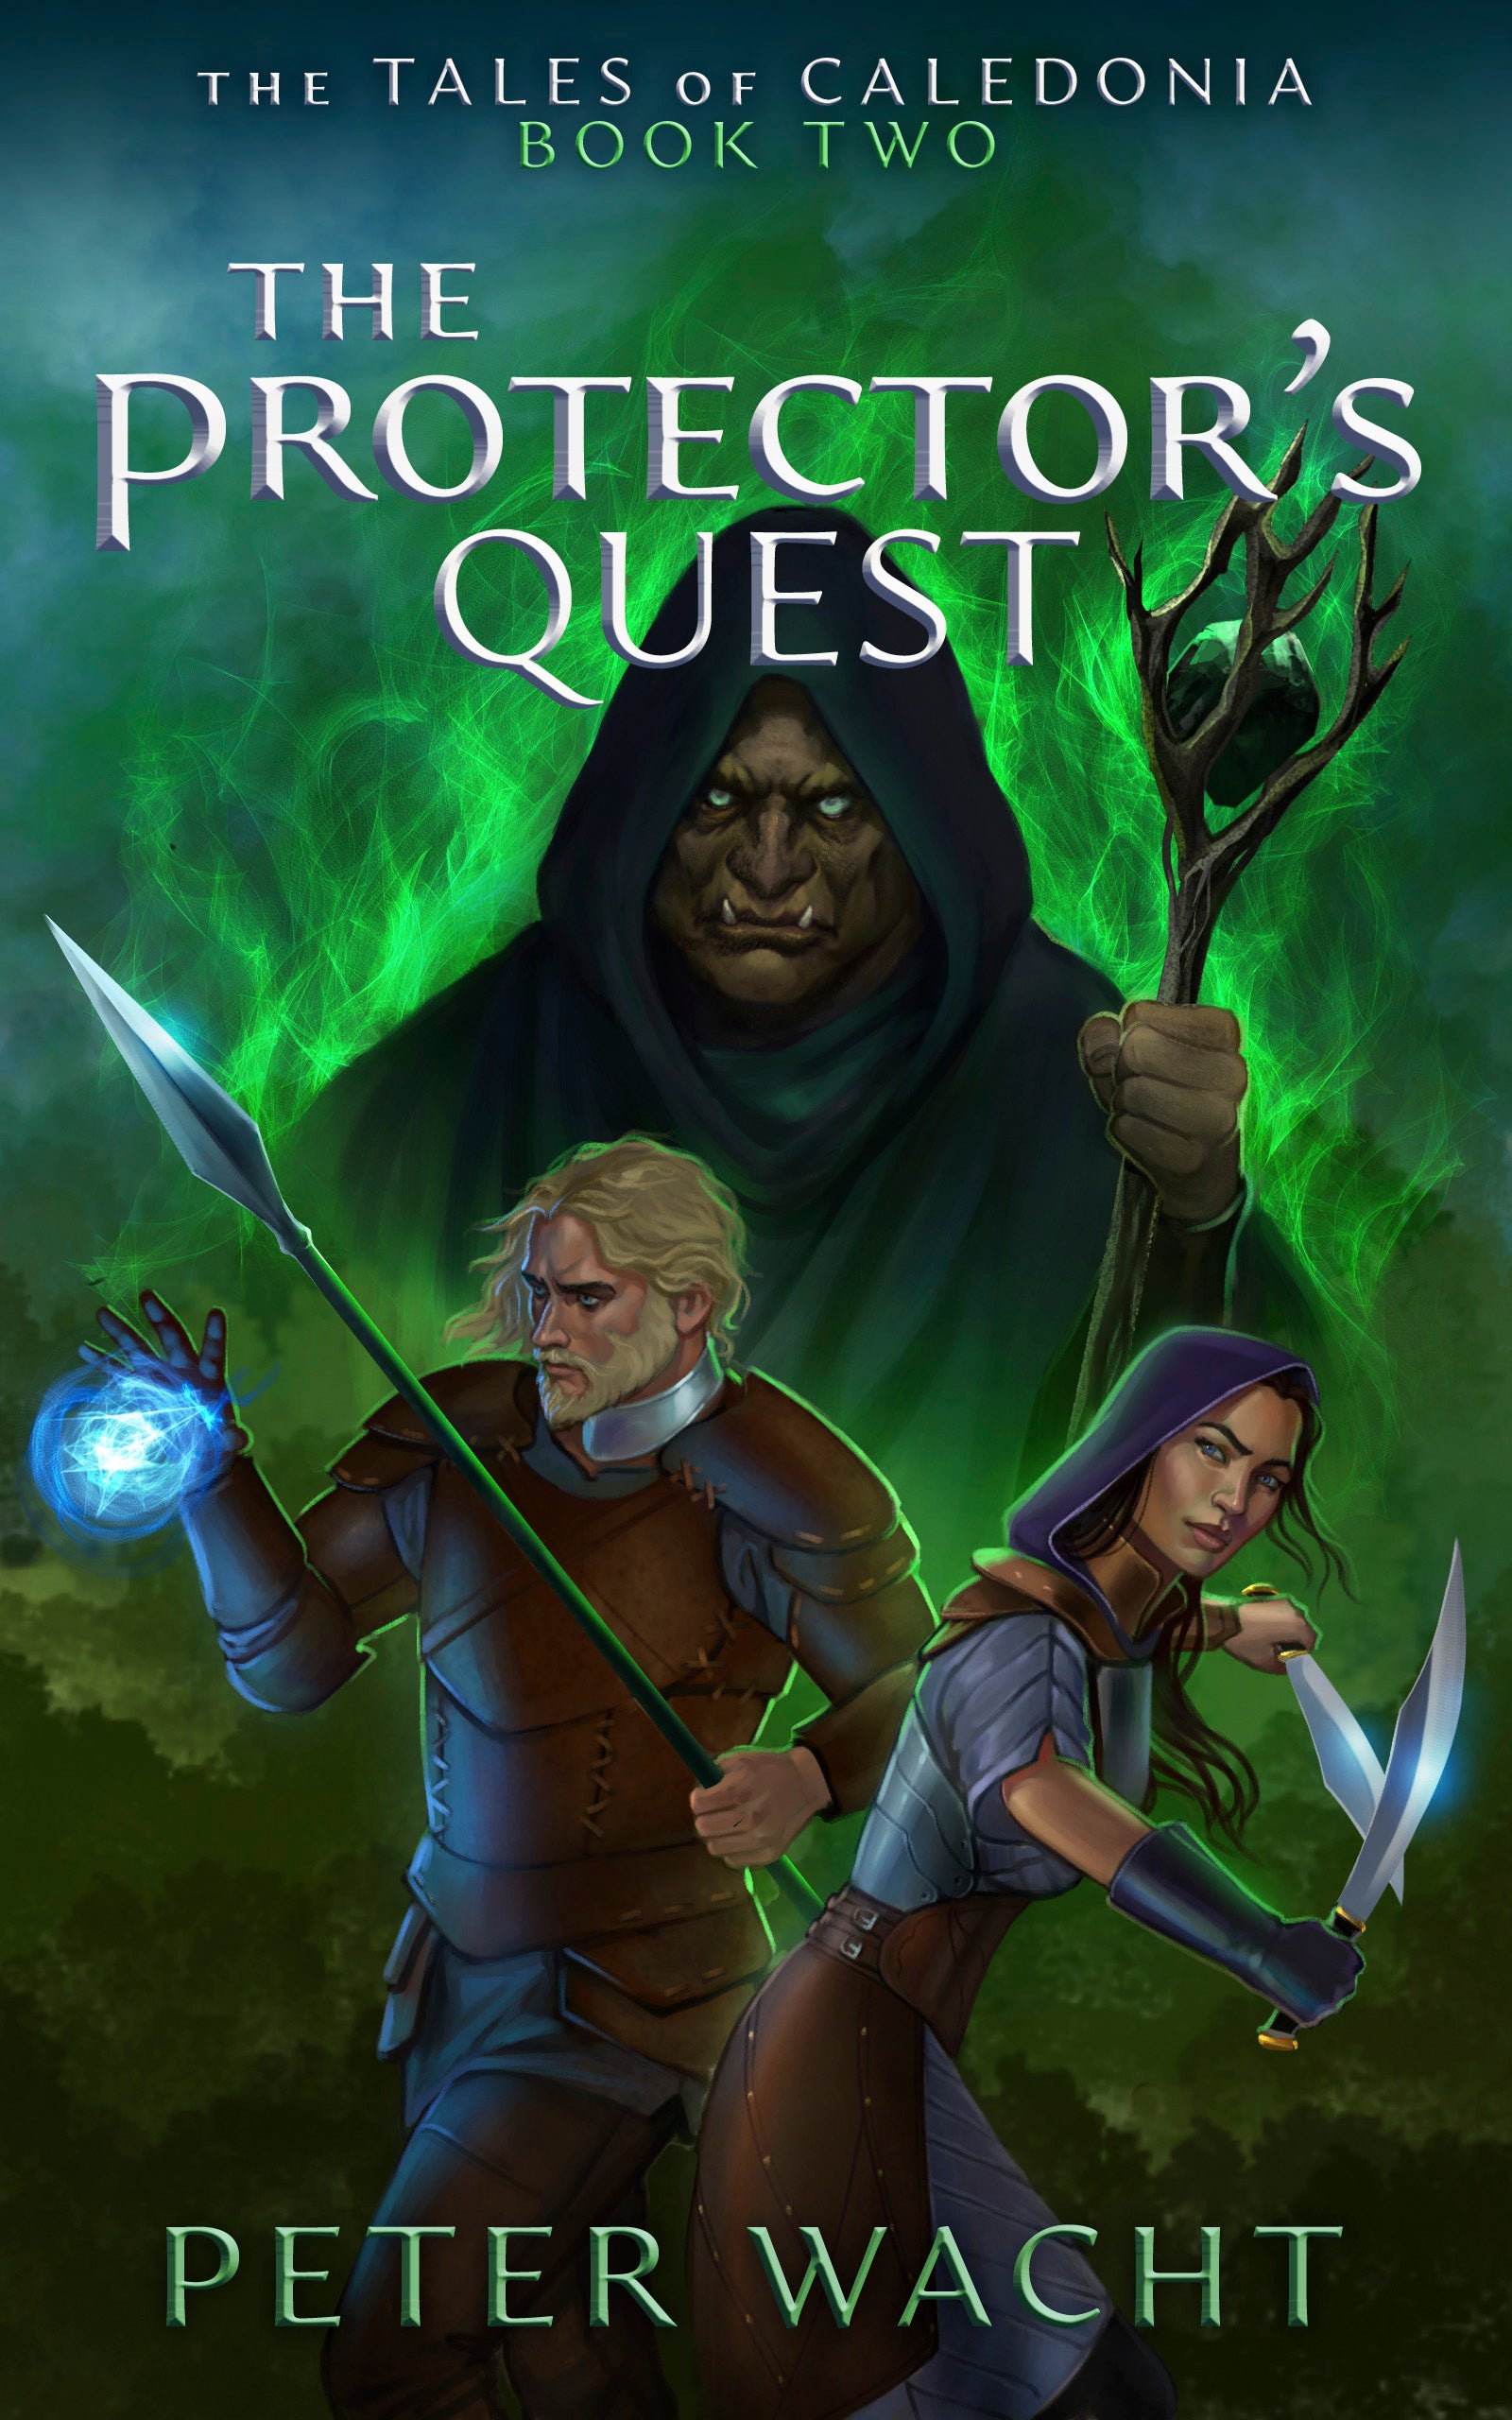 The Protector's Quest by Peter Wacht